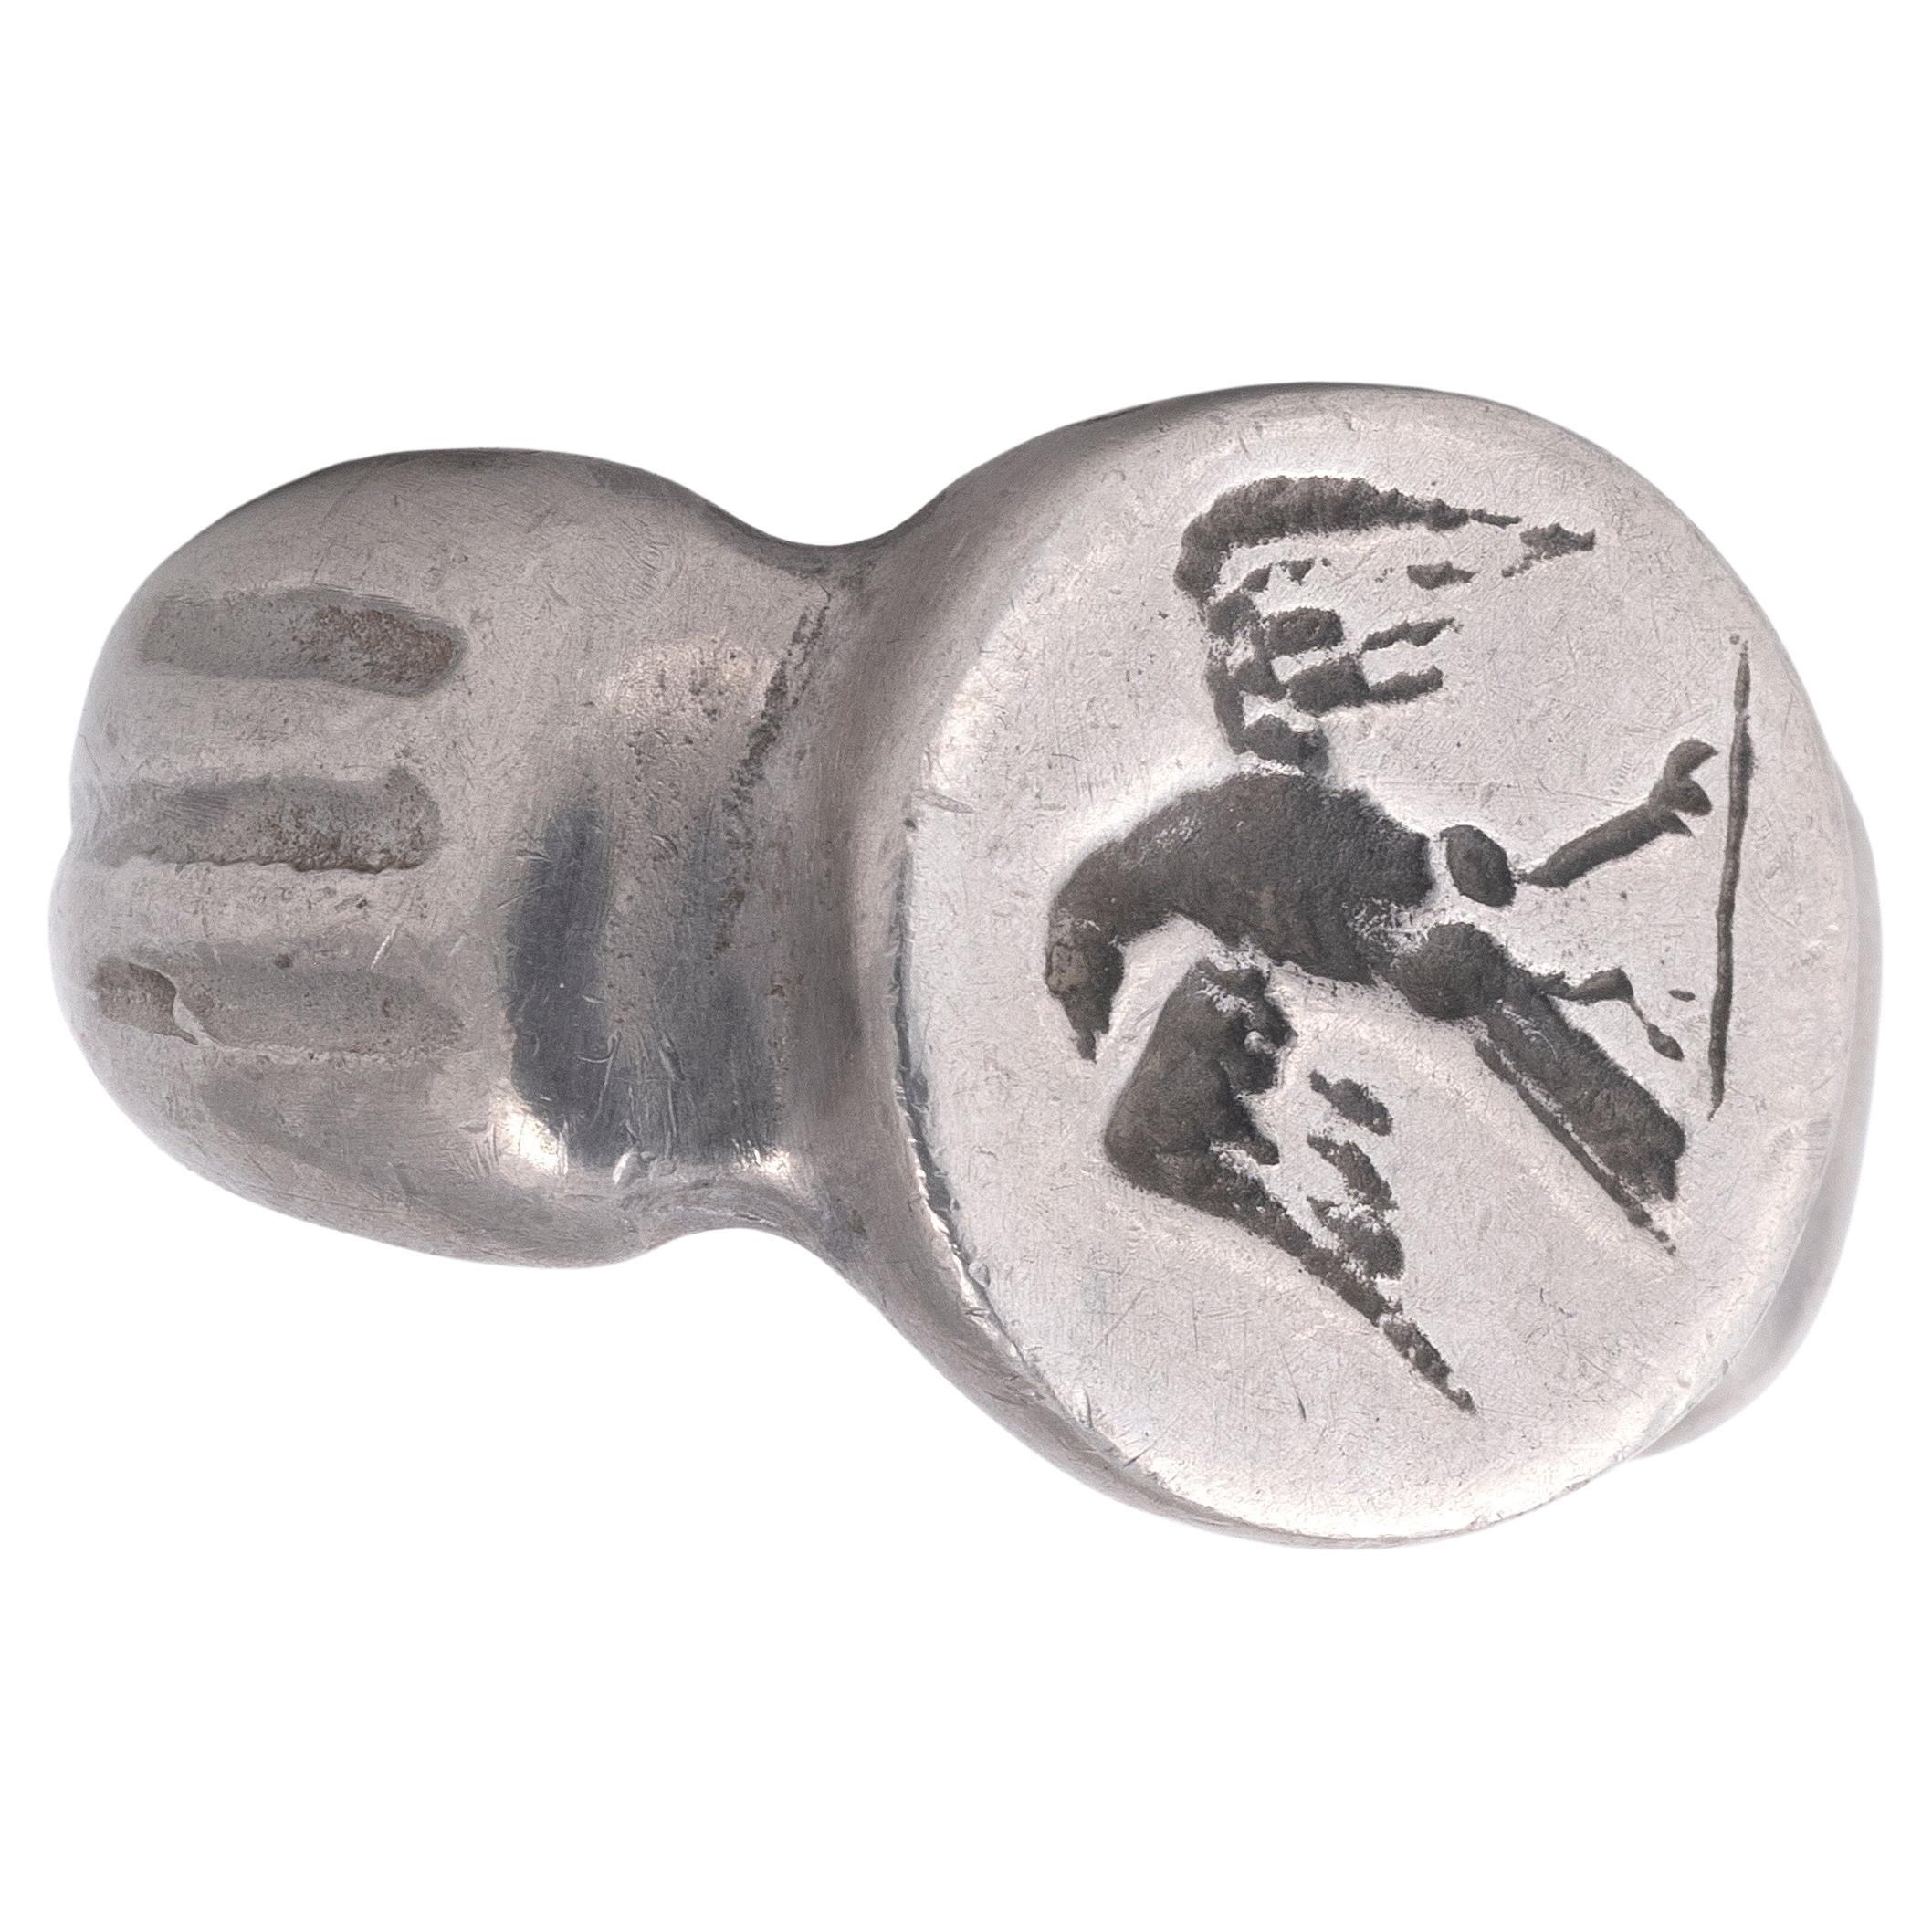 Roman Legionary silver ring. Wide angled shoulders, the oval bezel with an engraved eagle.
Size: 11
Weight: 19.8gr.
Date: Circa 1st Century AD
In Ancient Rome spotting an eagle in the sky was considered a symbol of good luck and assistance from the